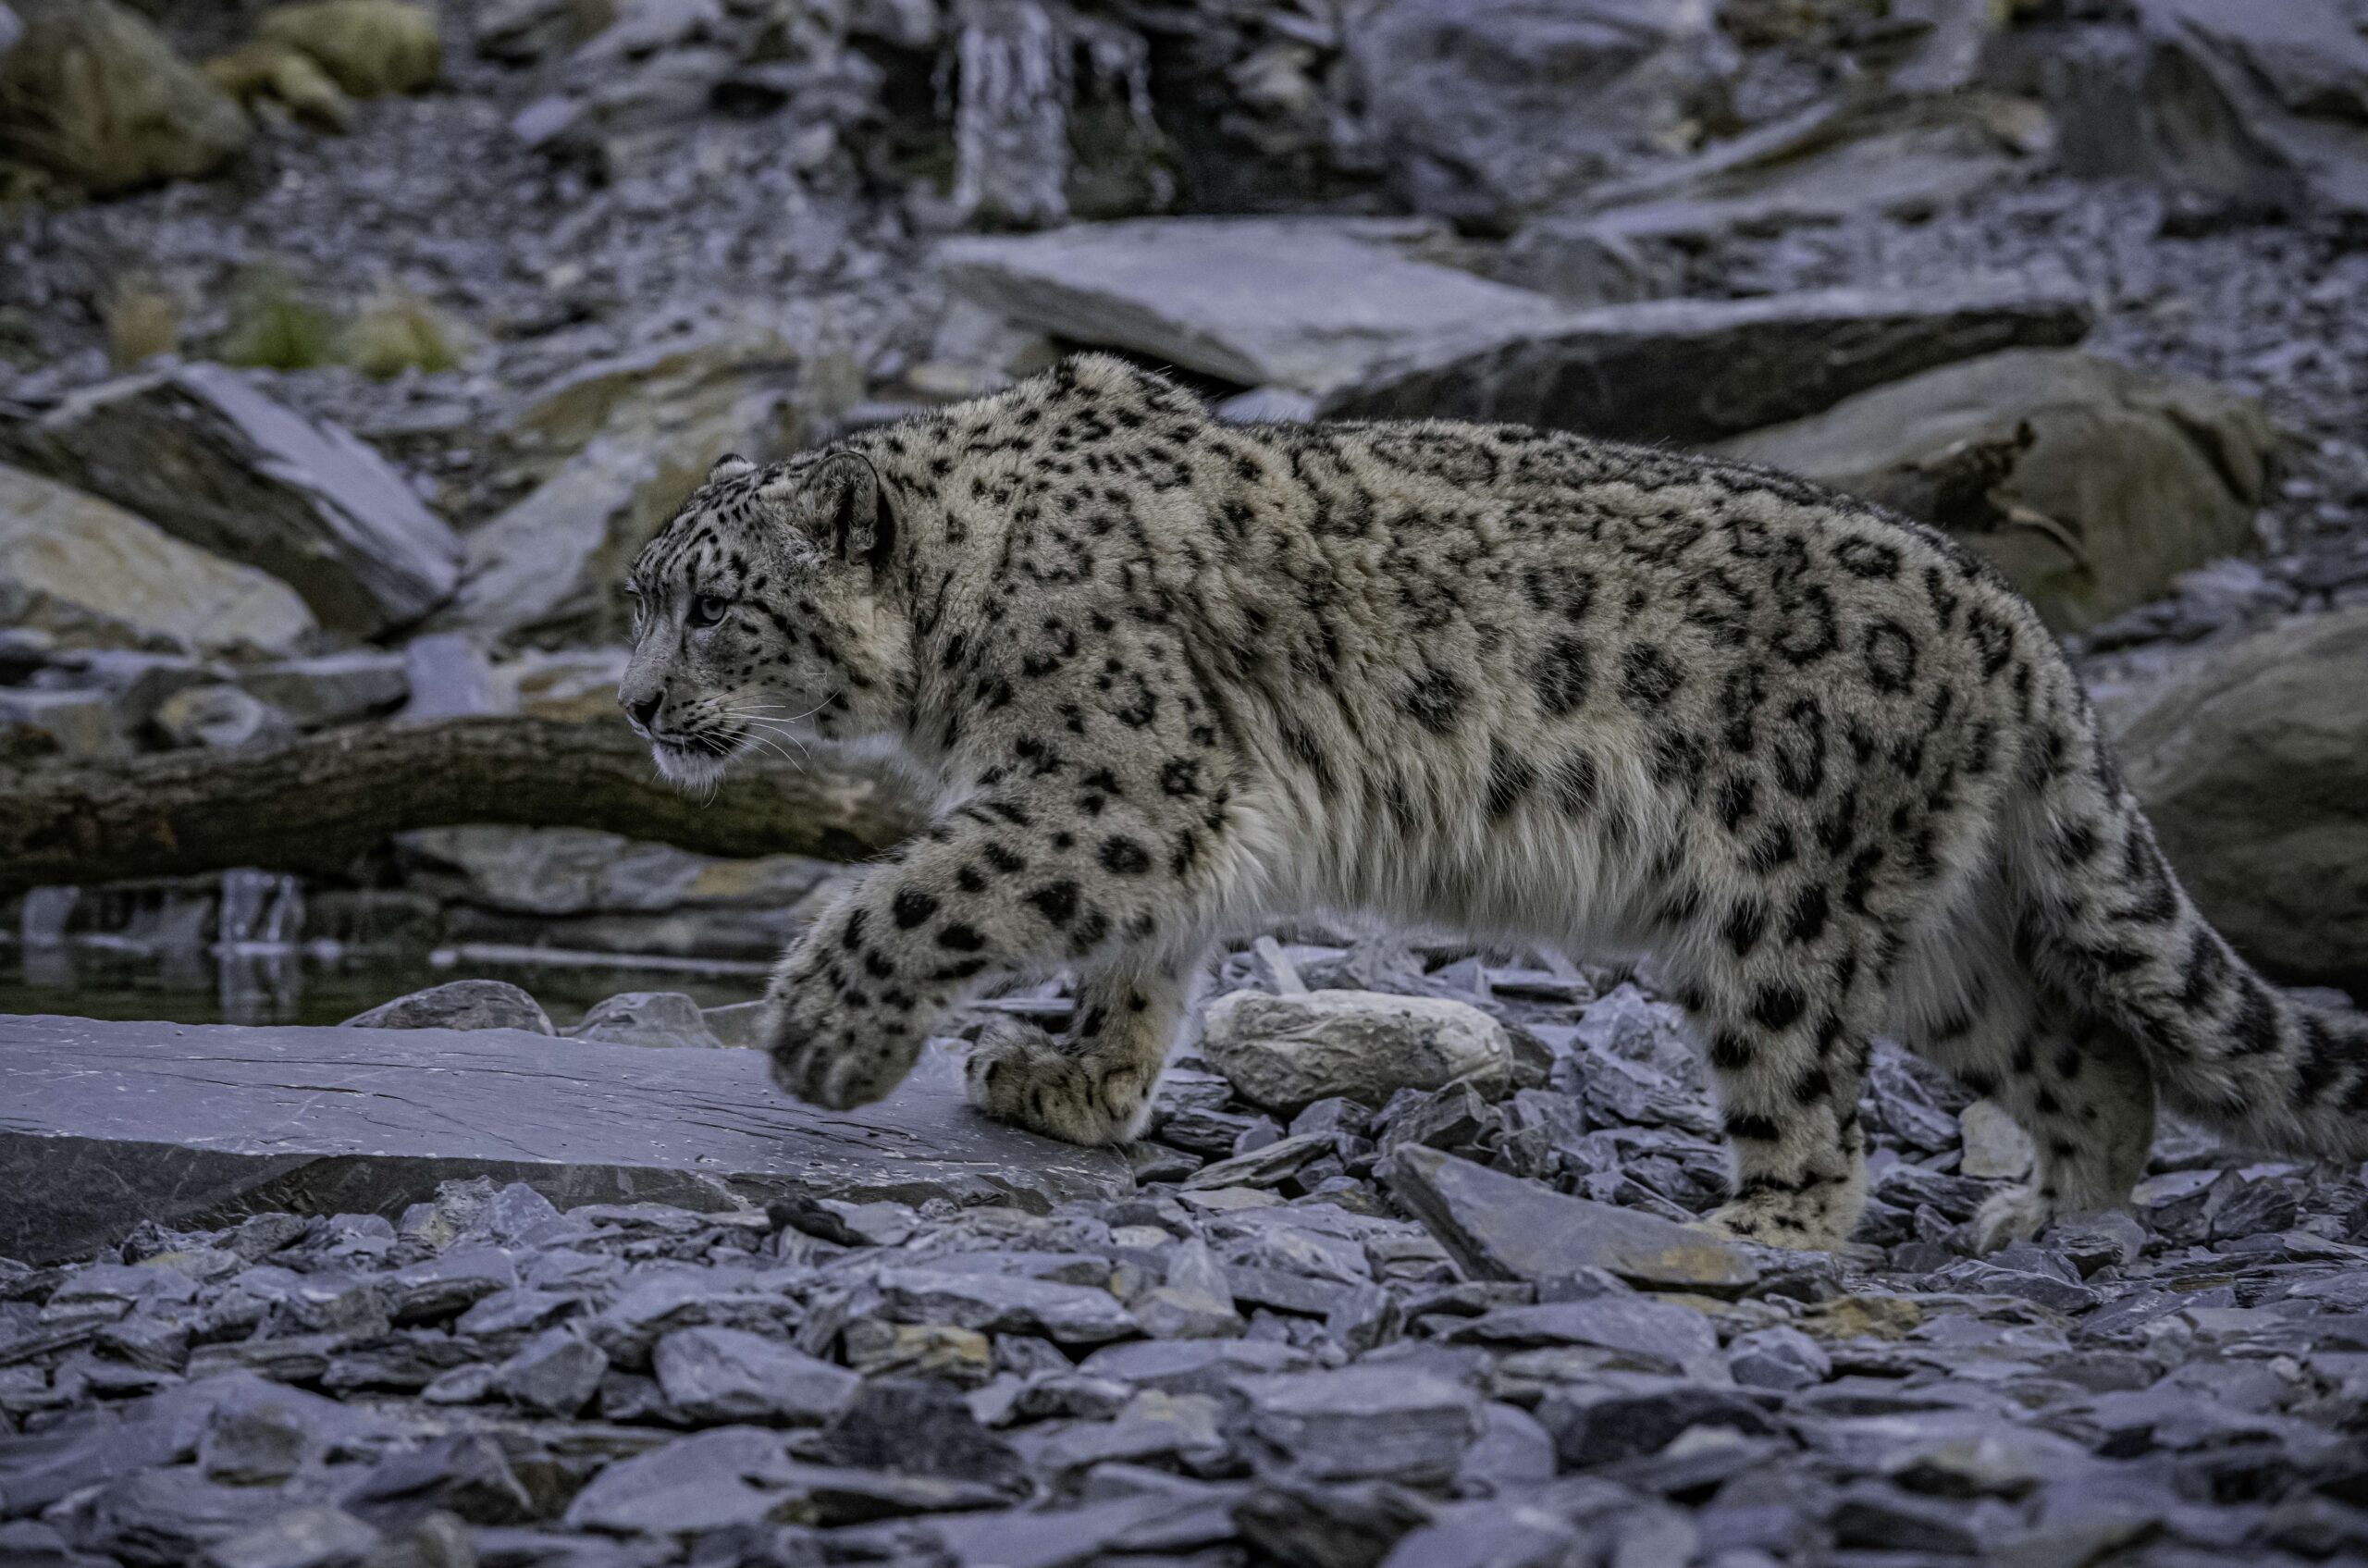 Snow leopards have arrived at Chester Zoo